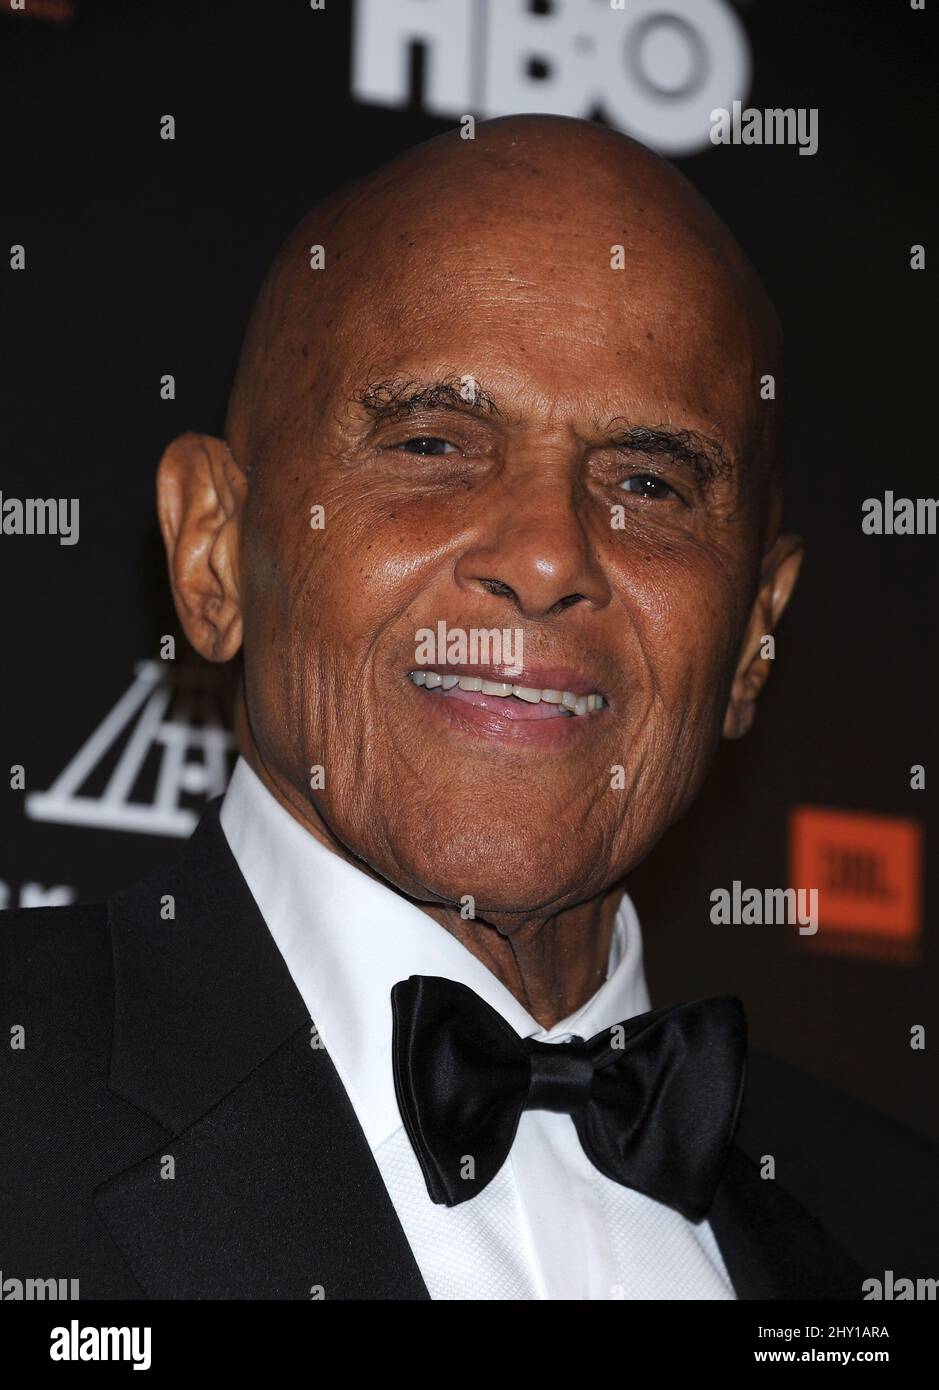 Harry Belafonte attending the 28th Annual Rock and Roll Hall of Fame Induction Ceremony at Nokia Theatre in Los Angeles, California. Stock Photo